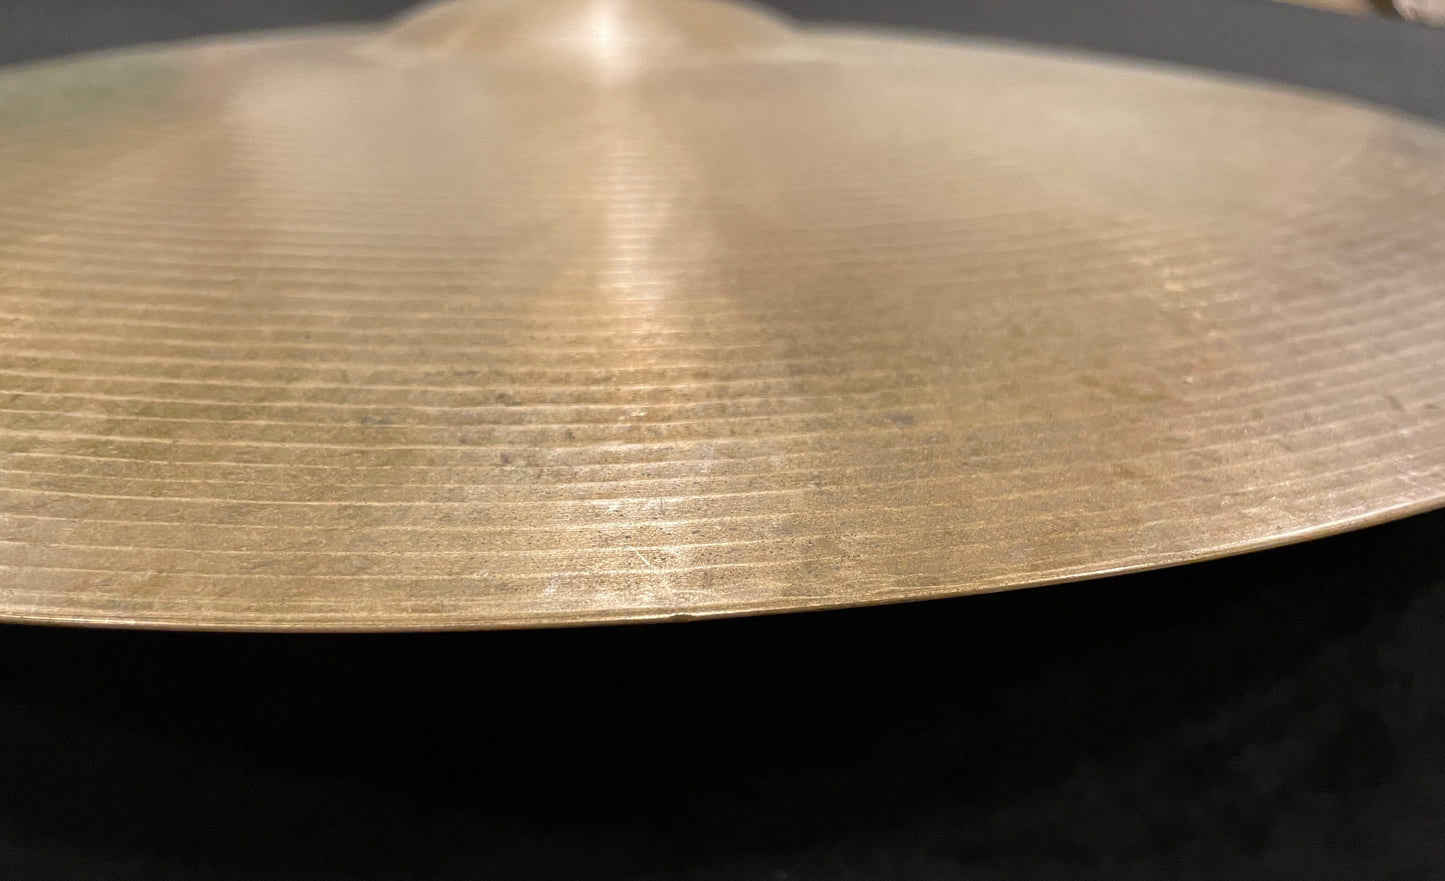 20" Paiste Pre-Serial Number Formula 602 Ride Cymbal 2004g #701 *Sound File*